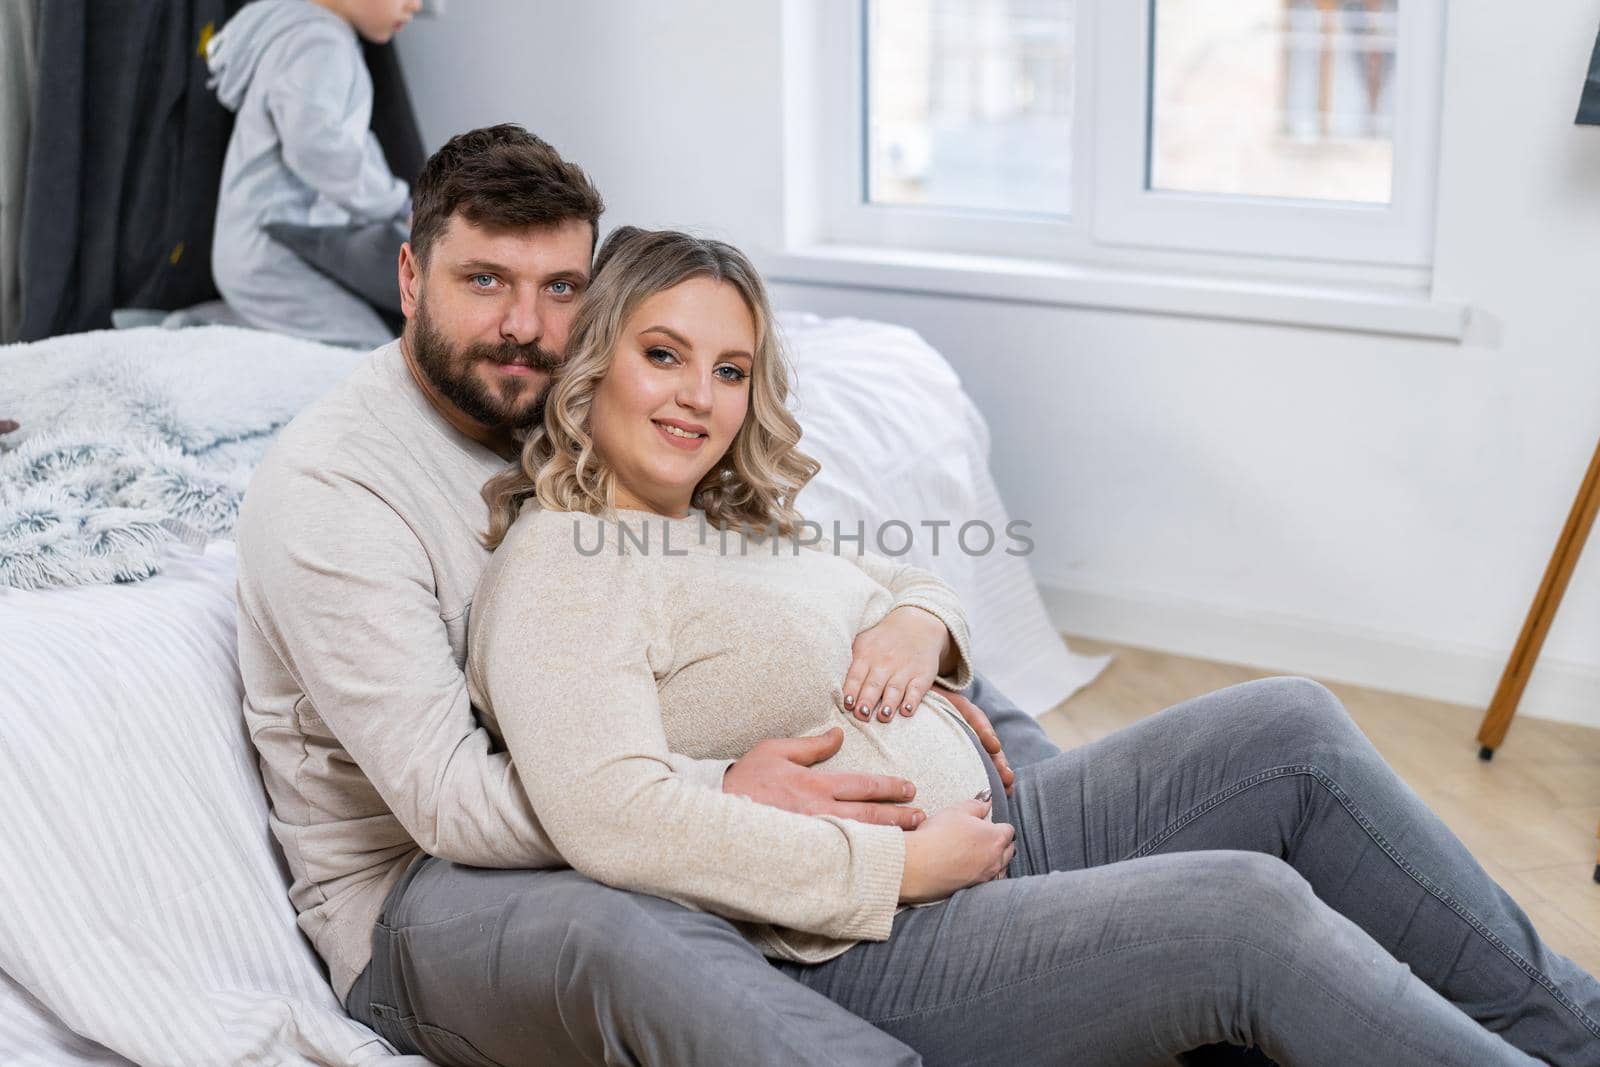 Happy family concept. Husband hug belly pregnant wife sitting floor indoor living room near sofa Caucasian man and woman pregnancy and new life concept. Love and care